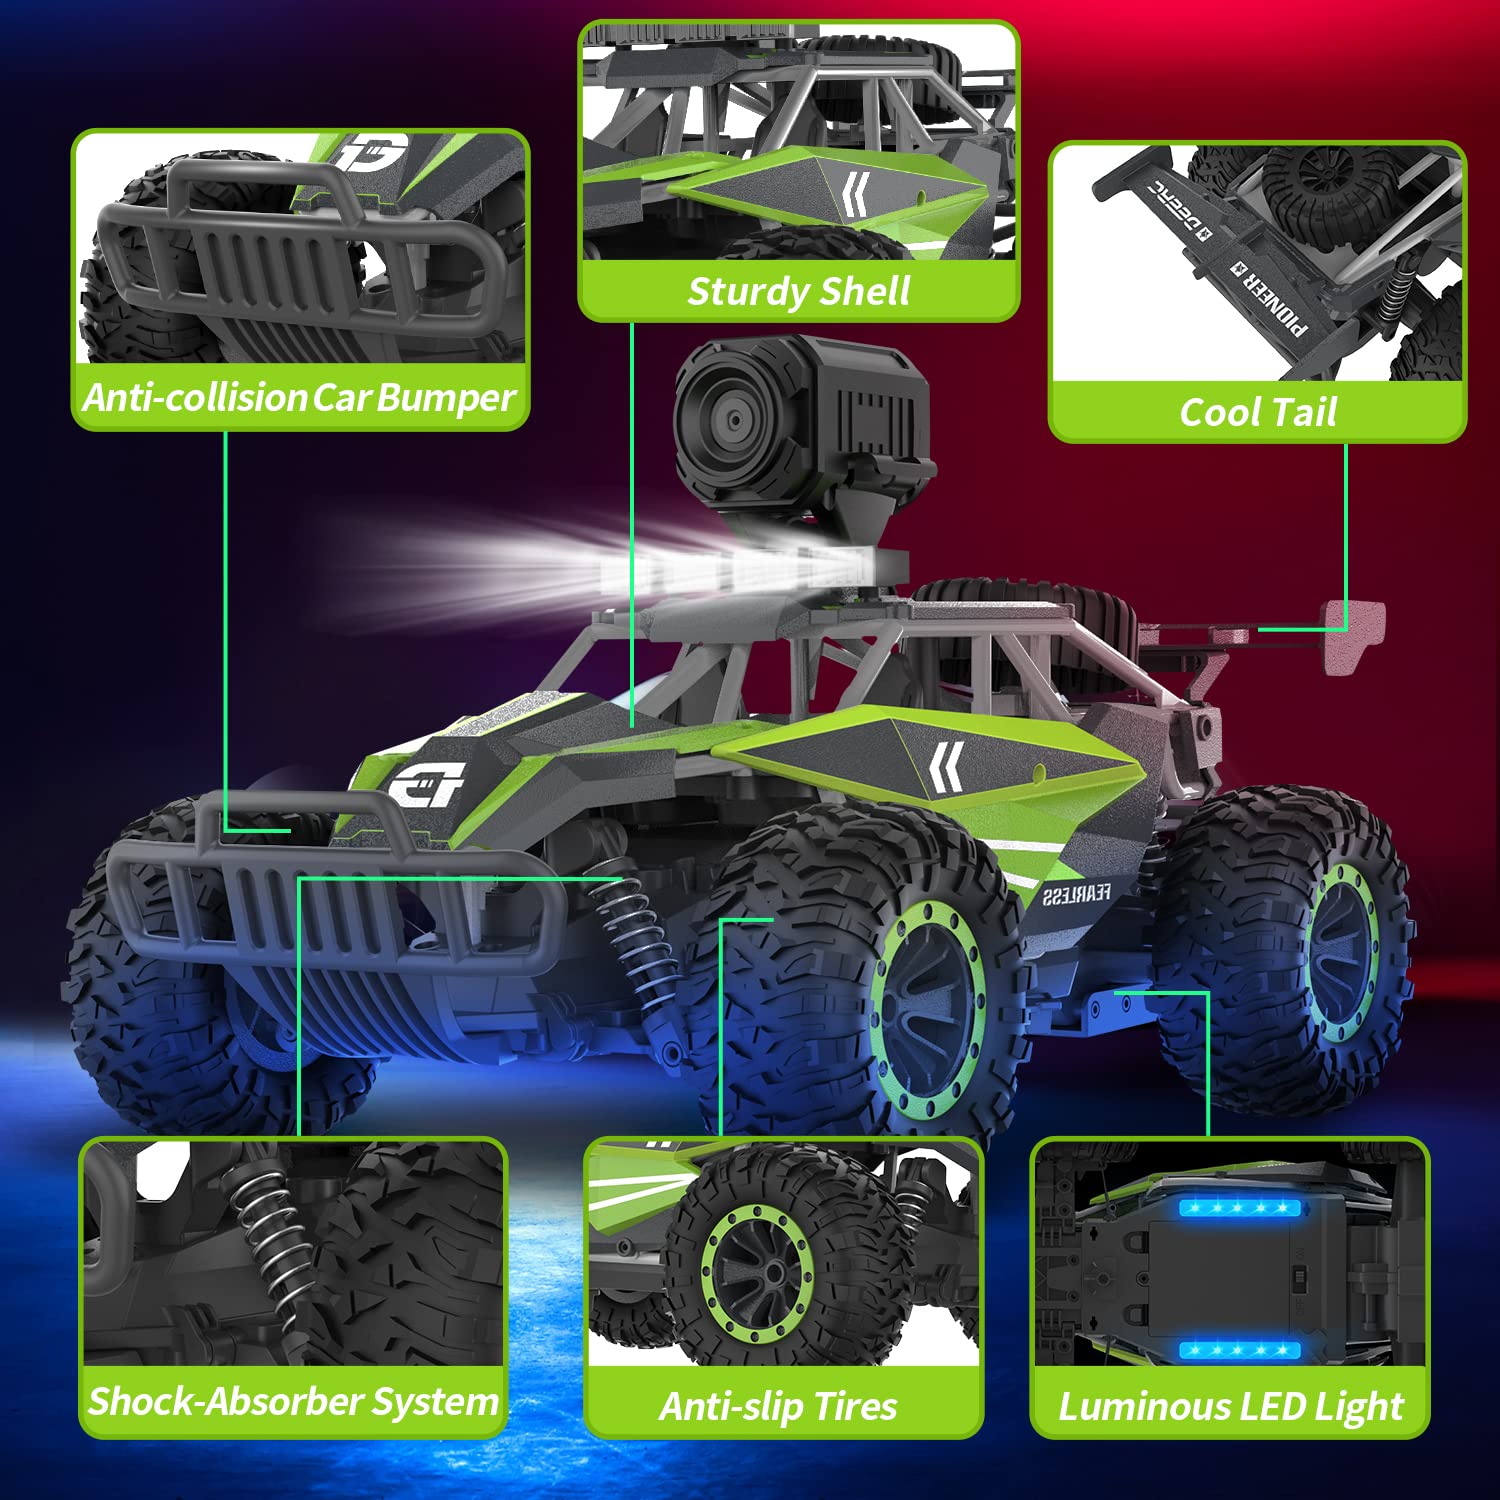 DEERC DE65 Remote Control Car with 1080P HD Camera,1:16 Scale RC Cars with LED Chassis Light&Headlights, 2.4Ghz High Speed Monster Truck Toy Vehicle, 2 Batteries for 60 Mins Play, Gift for Kids Boys